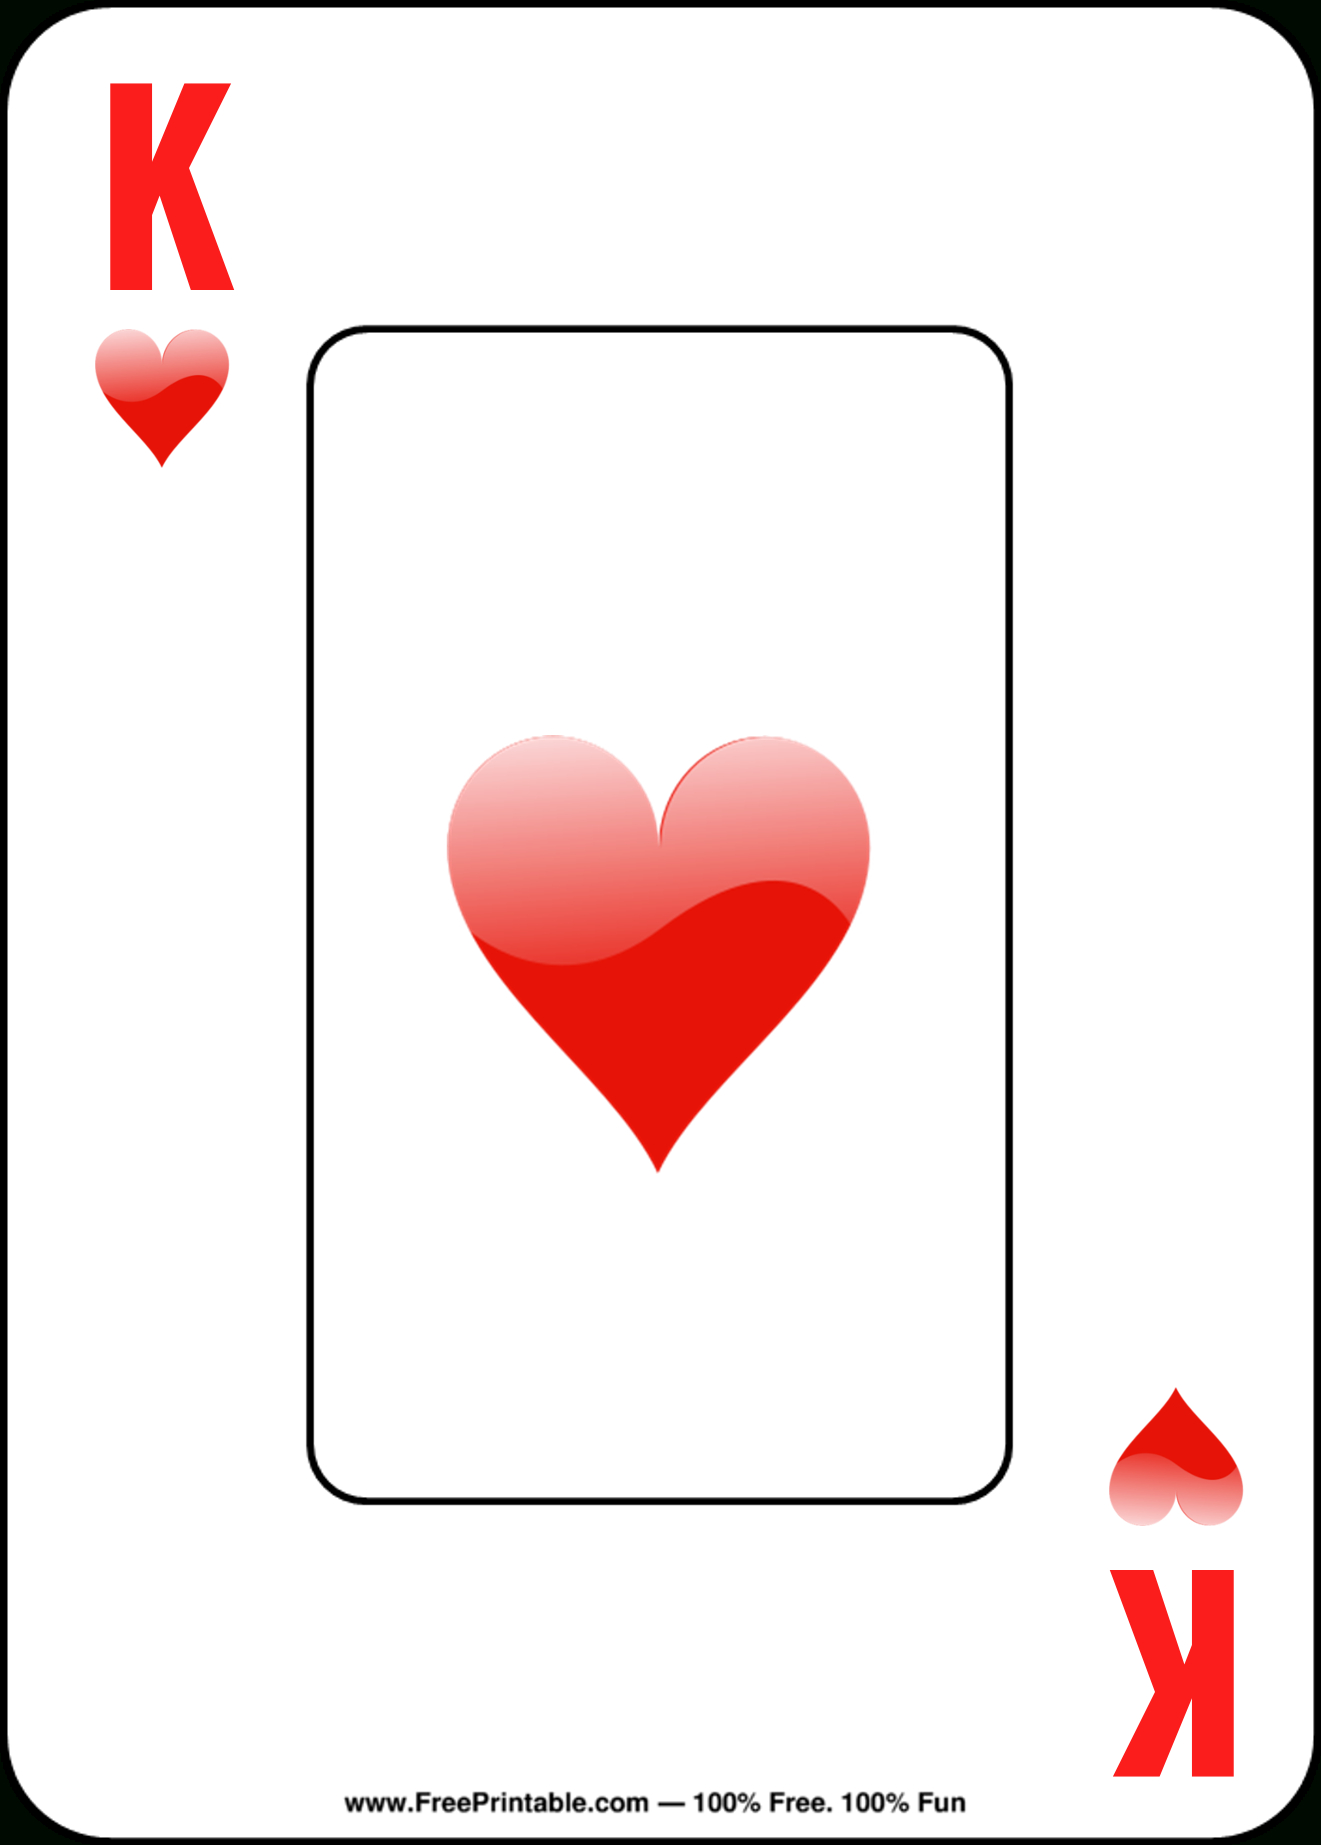 Free Printable Playing Cards - Free Printable Deck Of Cards